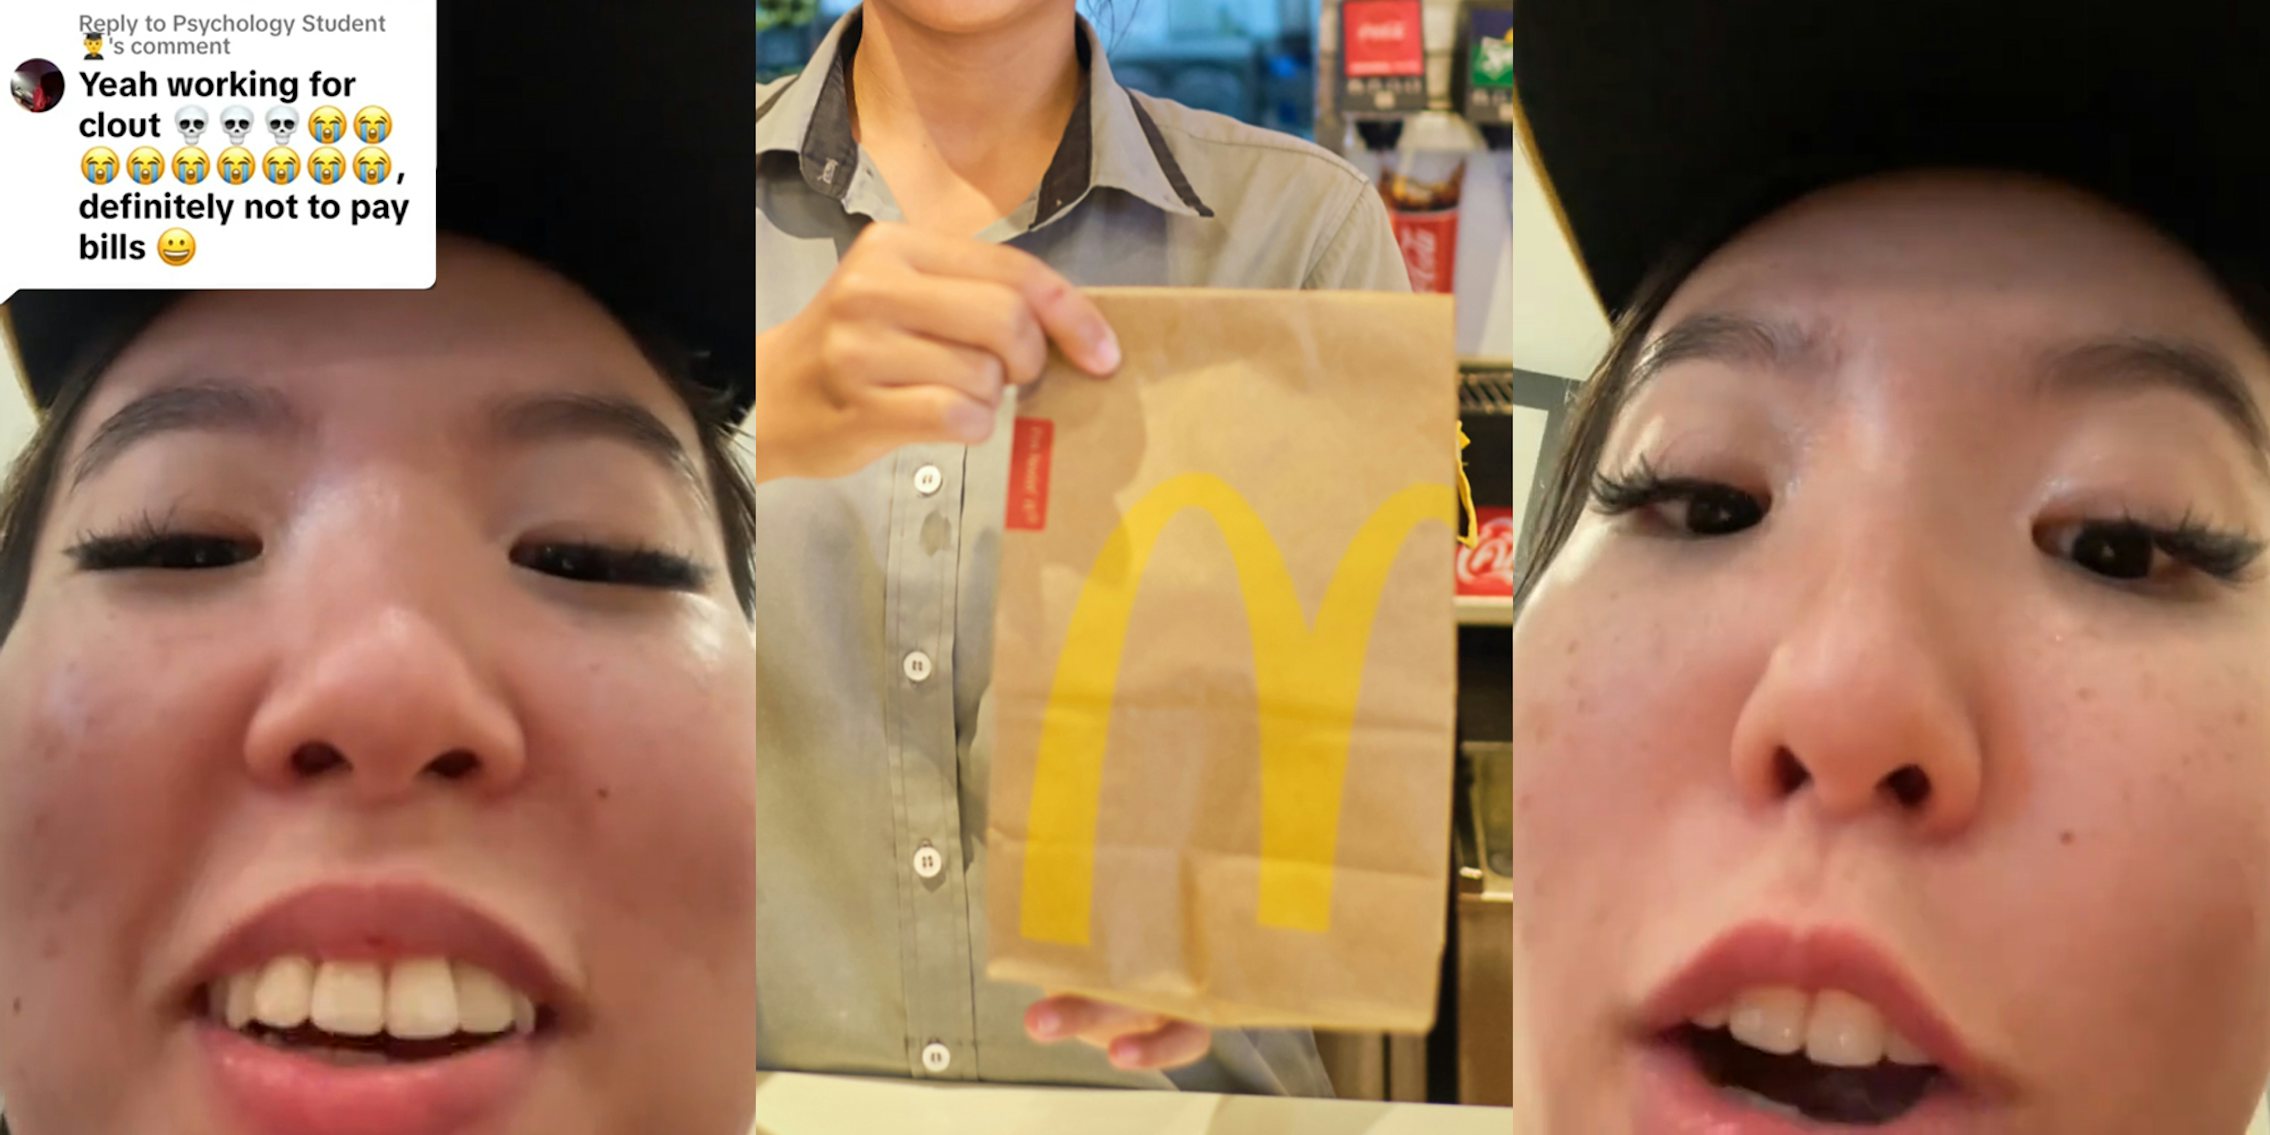 McDonald's employee speaking with caption 'Yeah working for clout definitely not to pay bills' (l) McDonald's worker holding bag of food (c) McDonald's employee speaking (r)